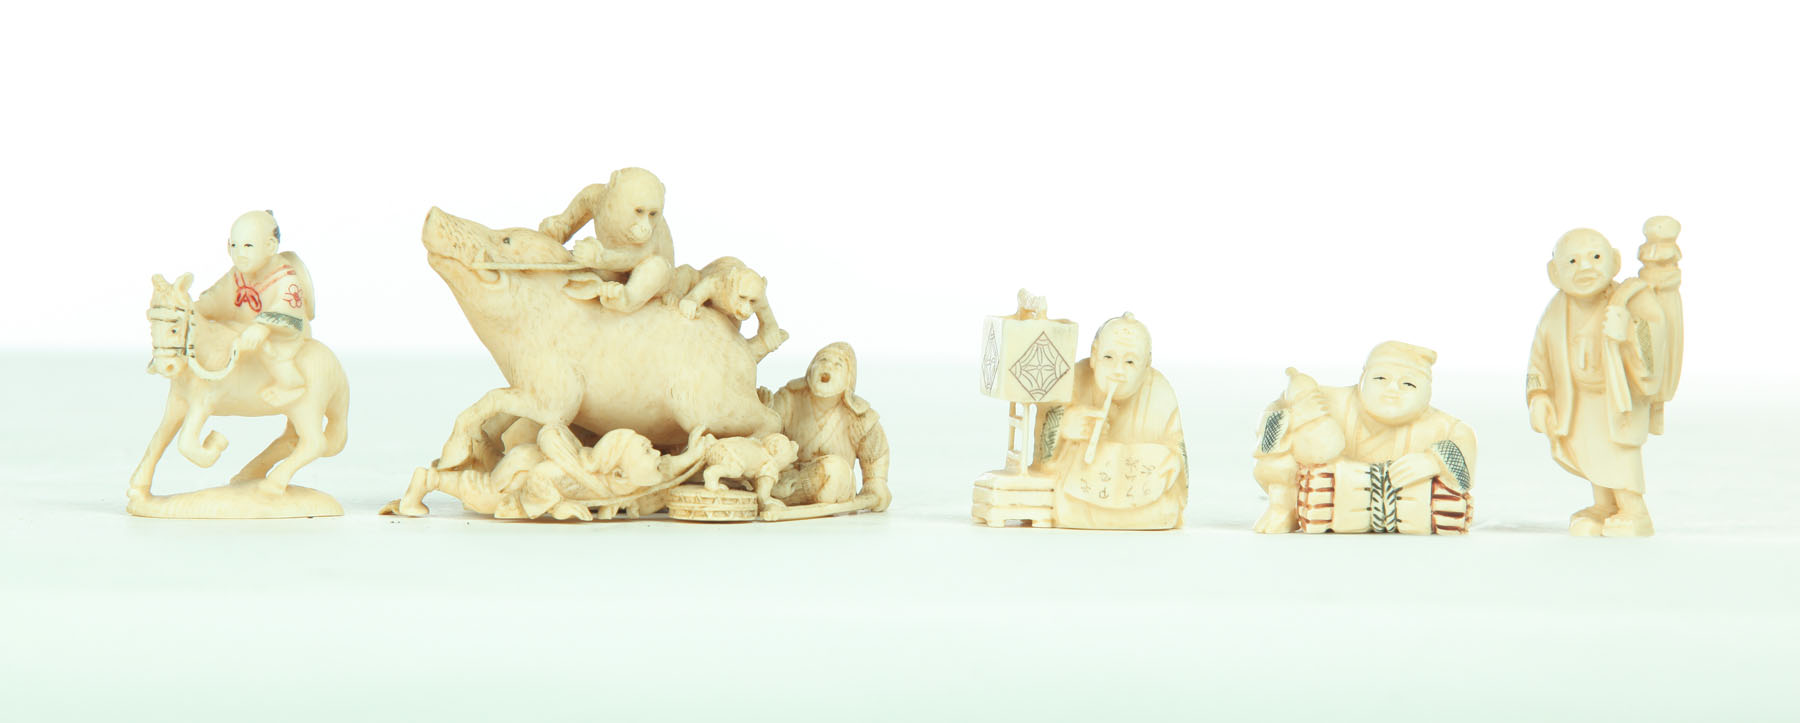 FIVE IVORY CARVINGS.  Japan  20th